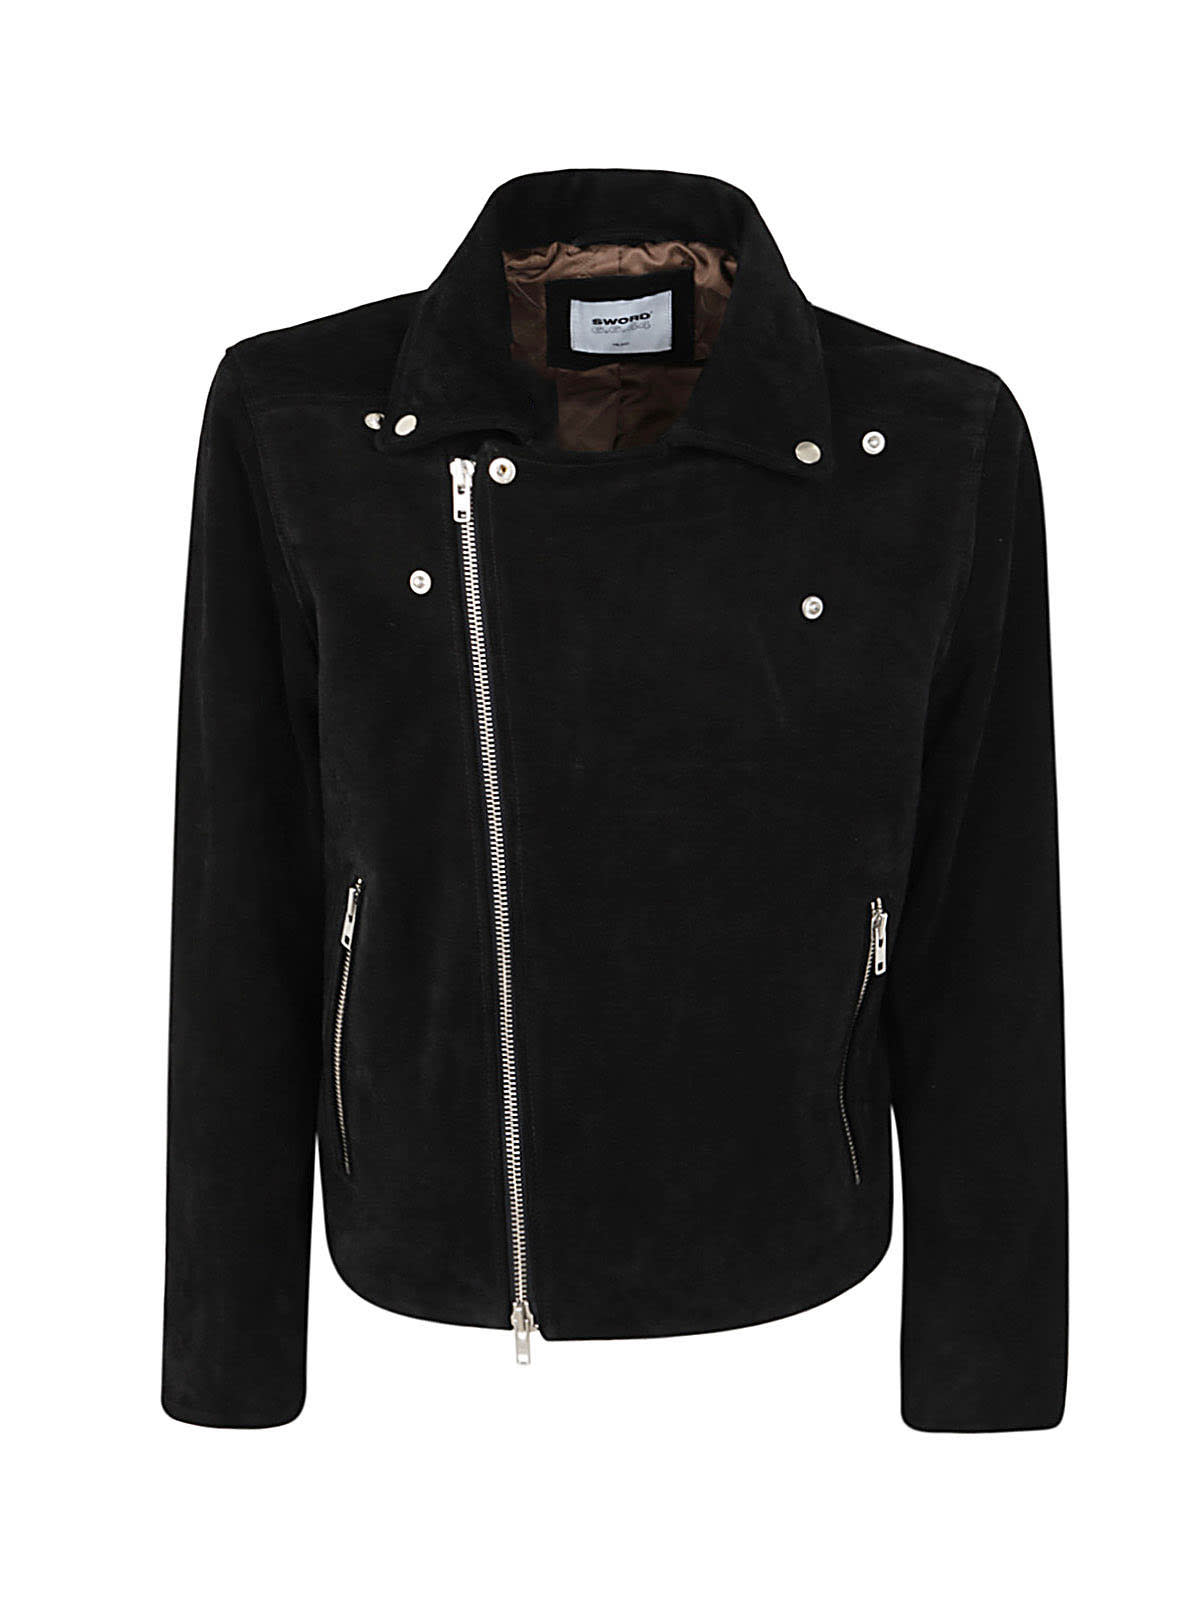 S.W.O.R.D 6.6.44 Leather Shirt